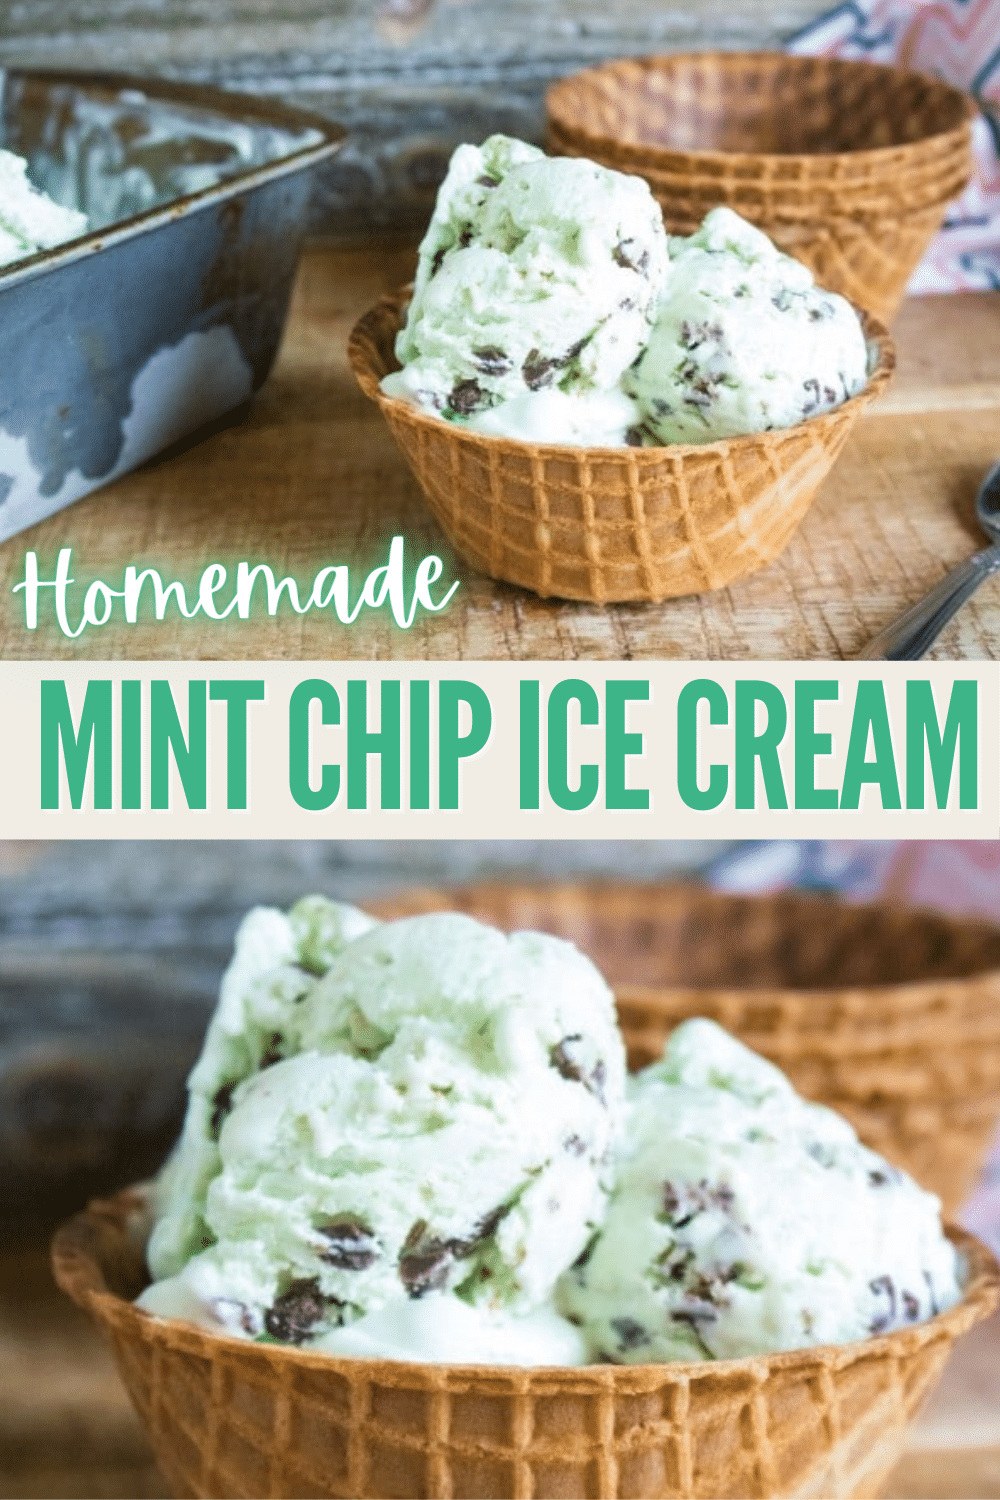 This easy homemade mint chip ice cream recipe has only 5 ingredients and is so quick to make. A sweetened condensed ice cream recipe the family will love. #icecream #dessert #mint via @wondermomwannab